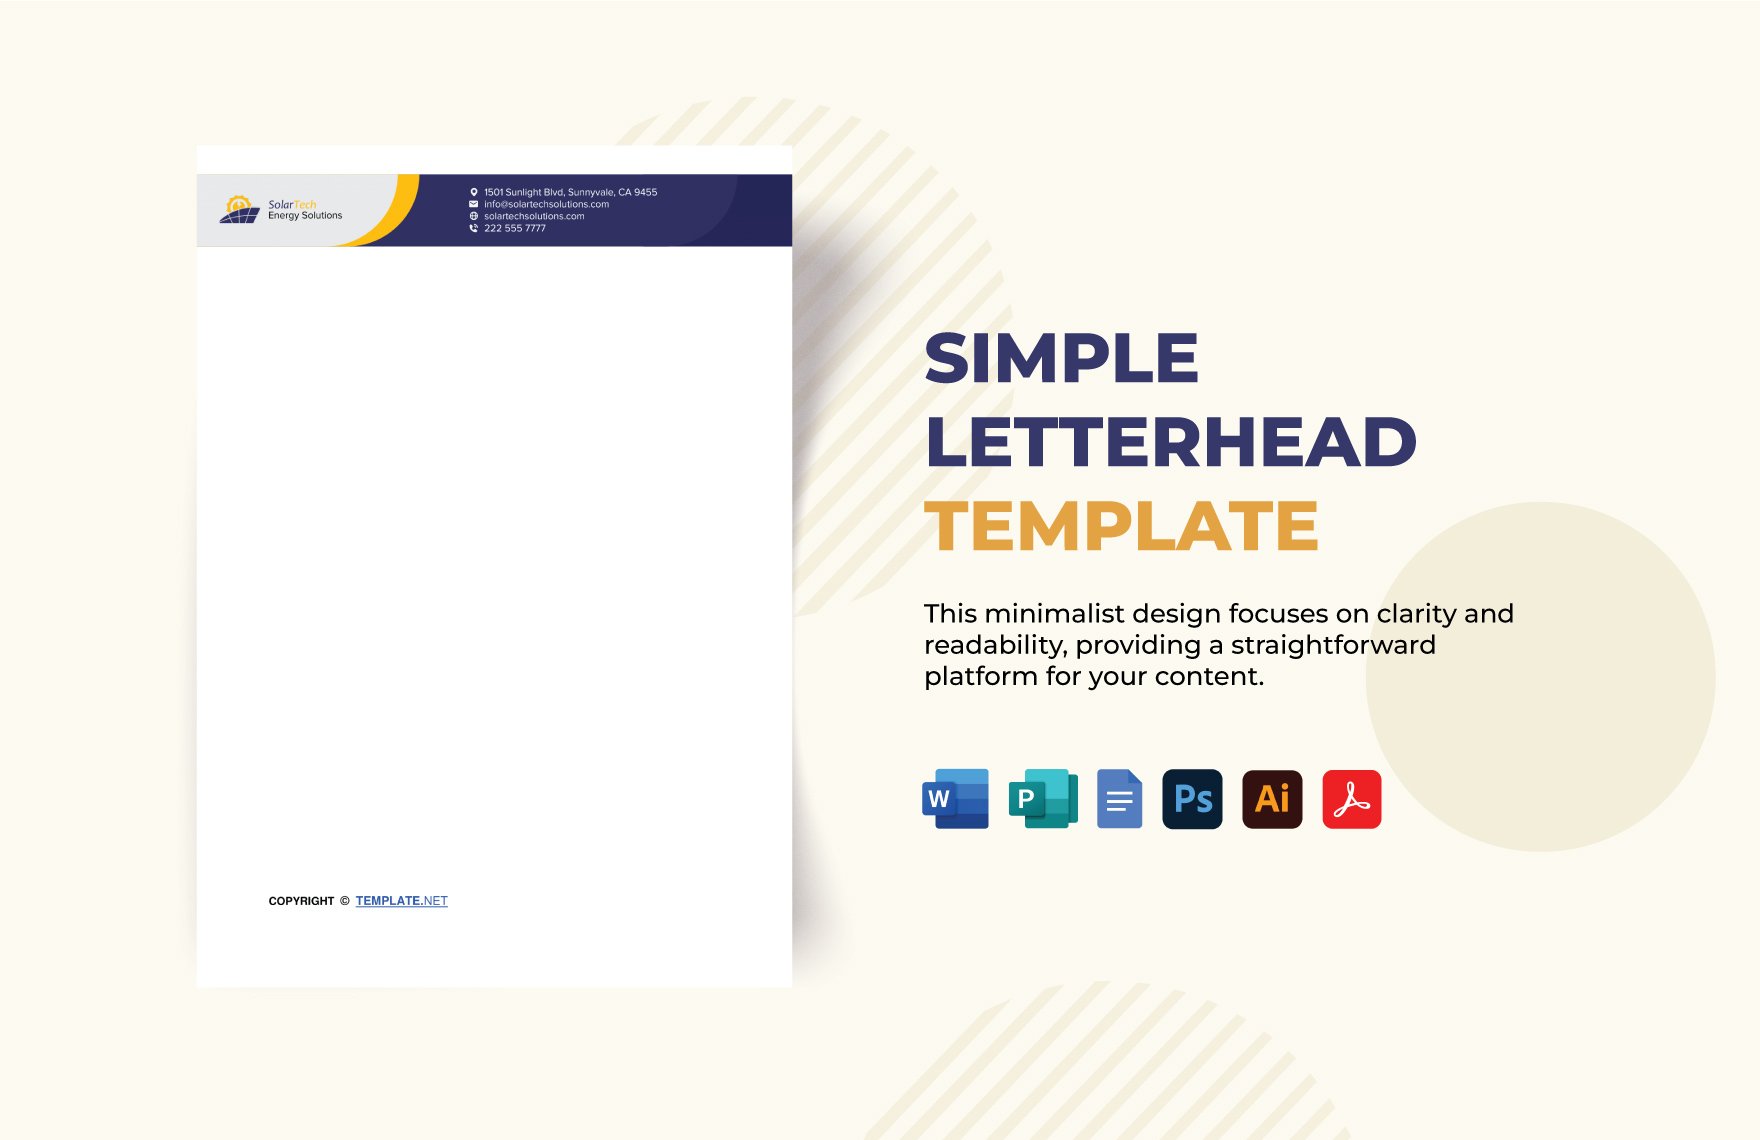 Free Simple Letterhead Template in Word, Google Docs, PDF, Illustrator, PSD, Publisher, InDesign